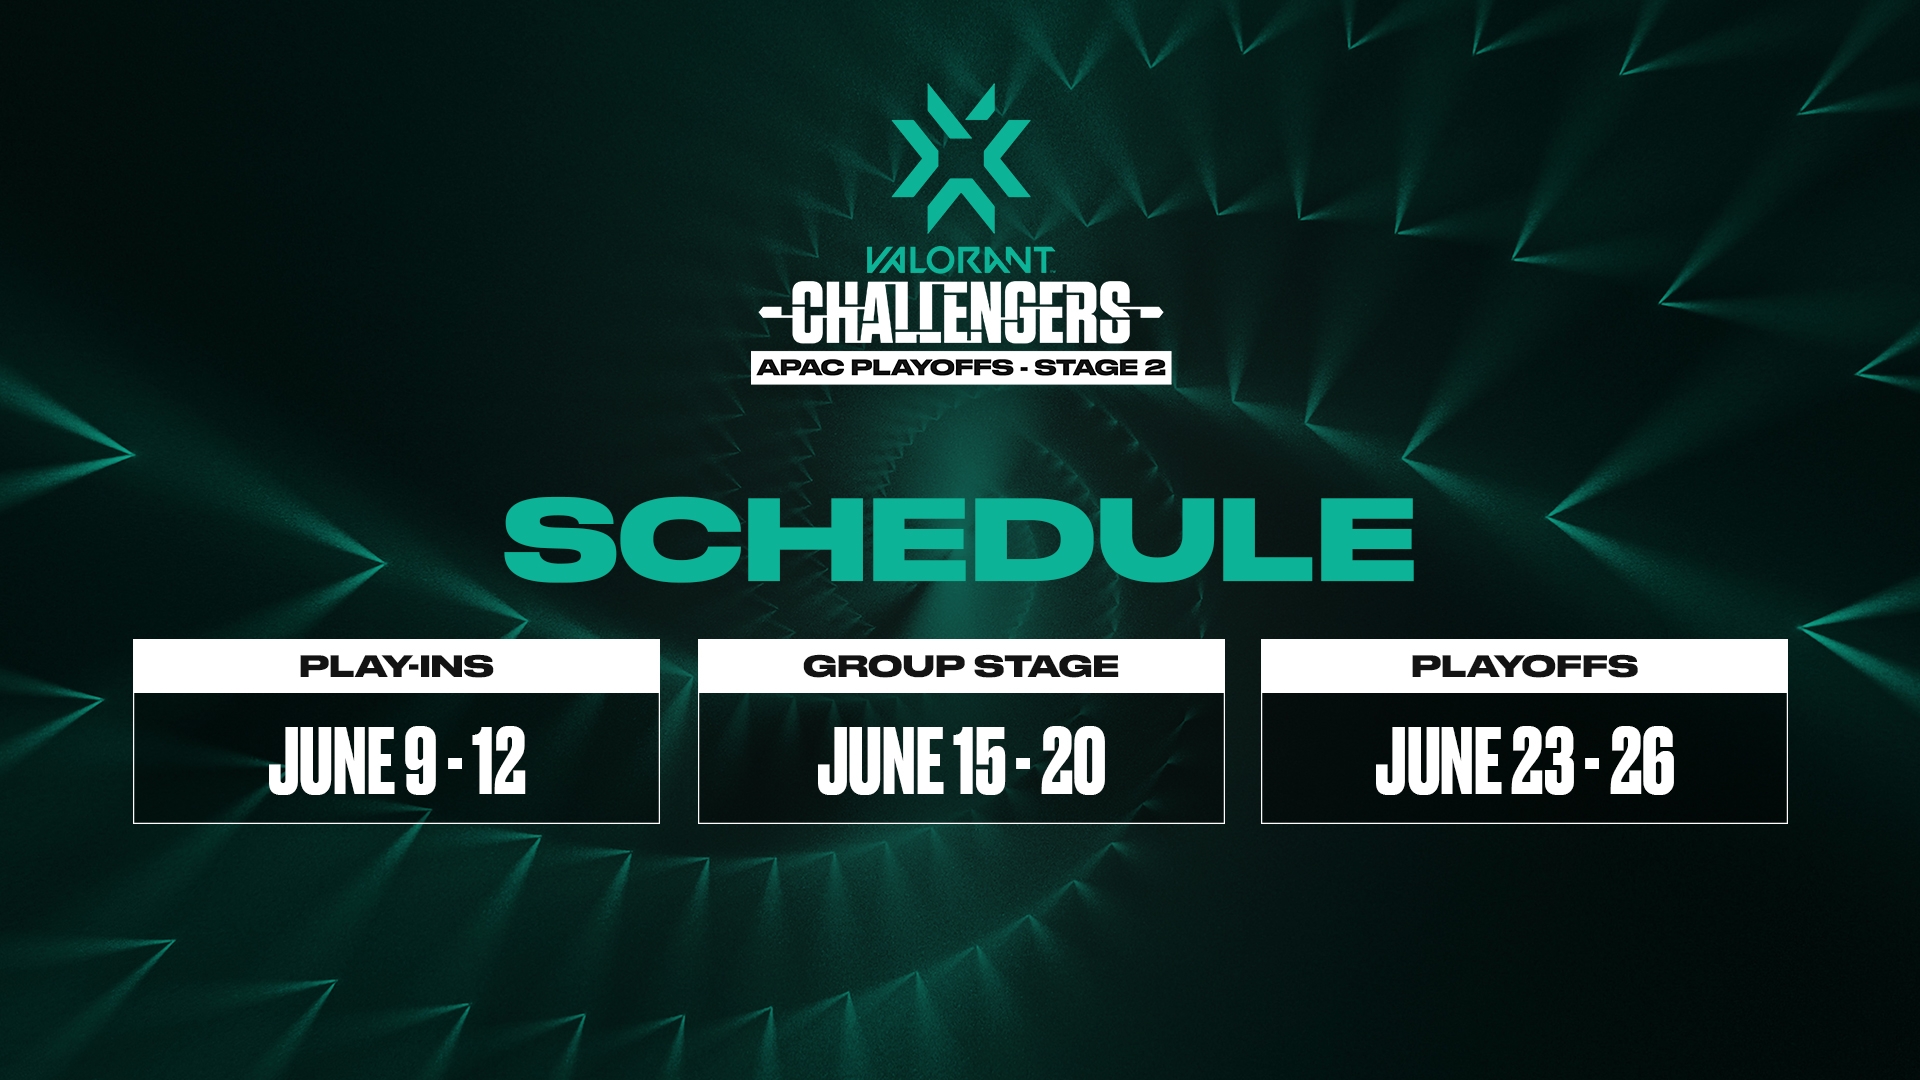 VCT 2022 APAC Challengers Stage 2: